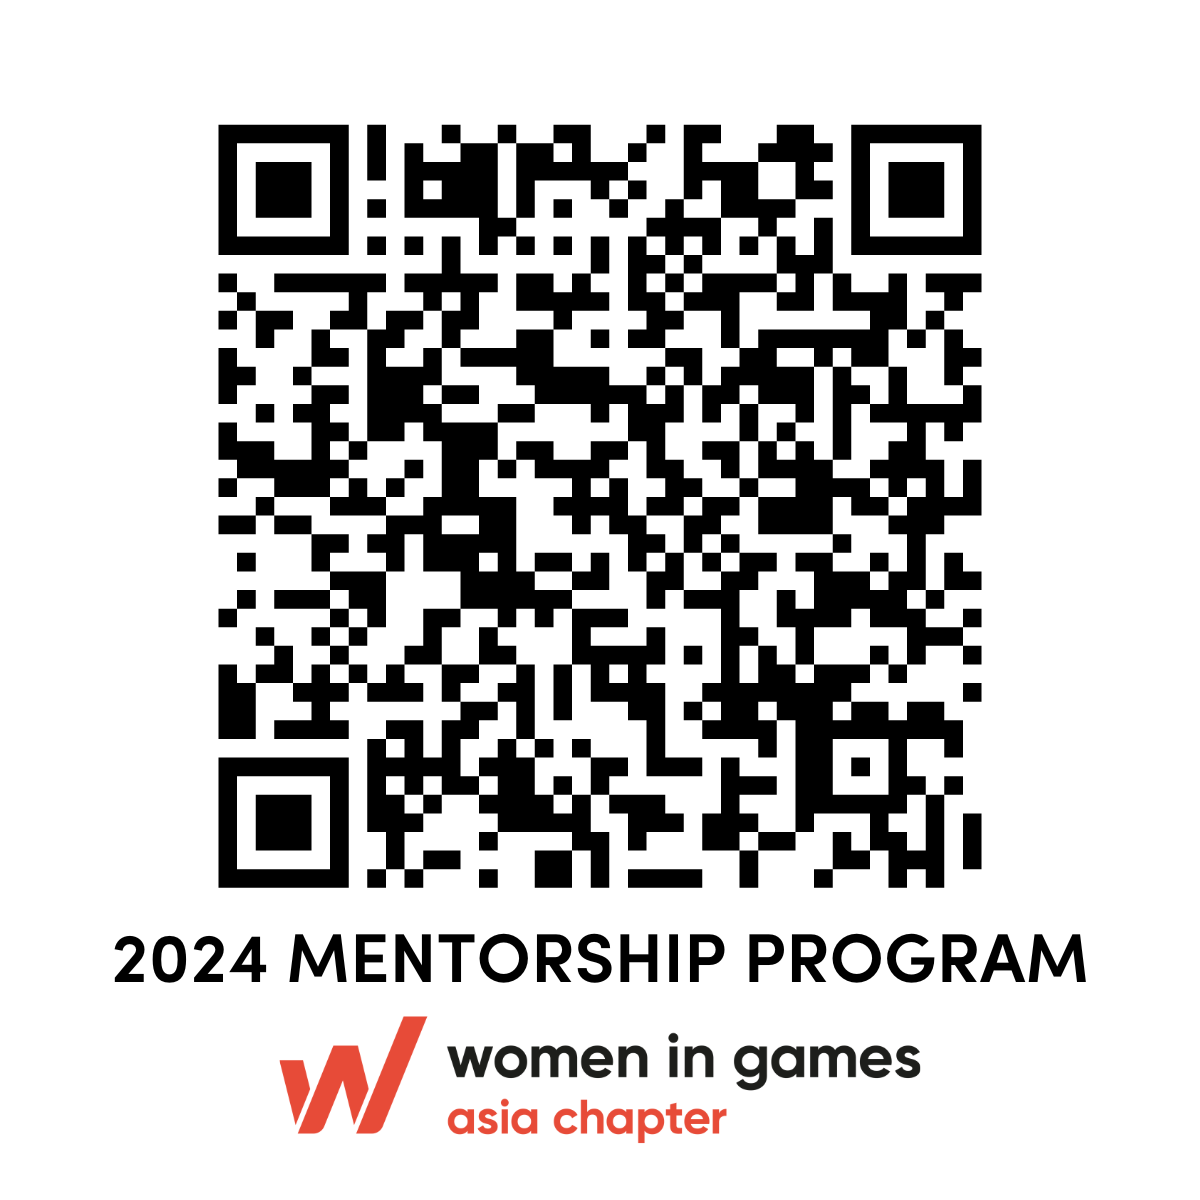 Women in Games @wigj Asia Chapter will be running our pilot Mentorship Program, and we are currently recruiting mentors to assist the next generation of professionals within the games industry! For more info, please refer to the sign-up form below: 👉 bit.ly/WIGA2024Mentor